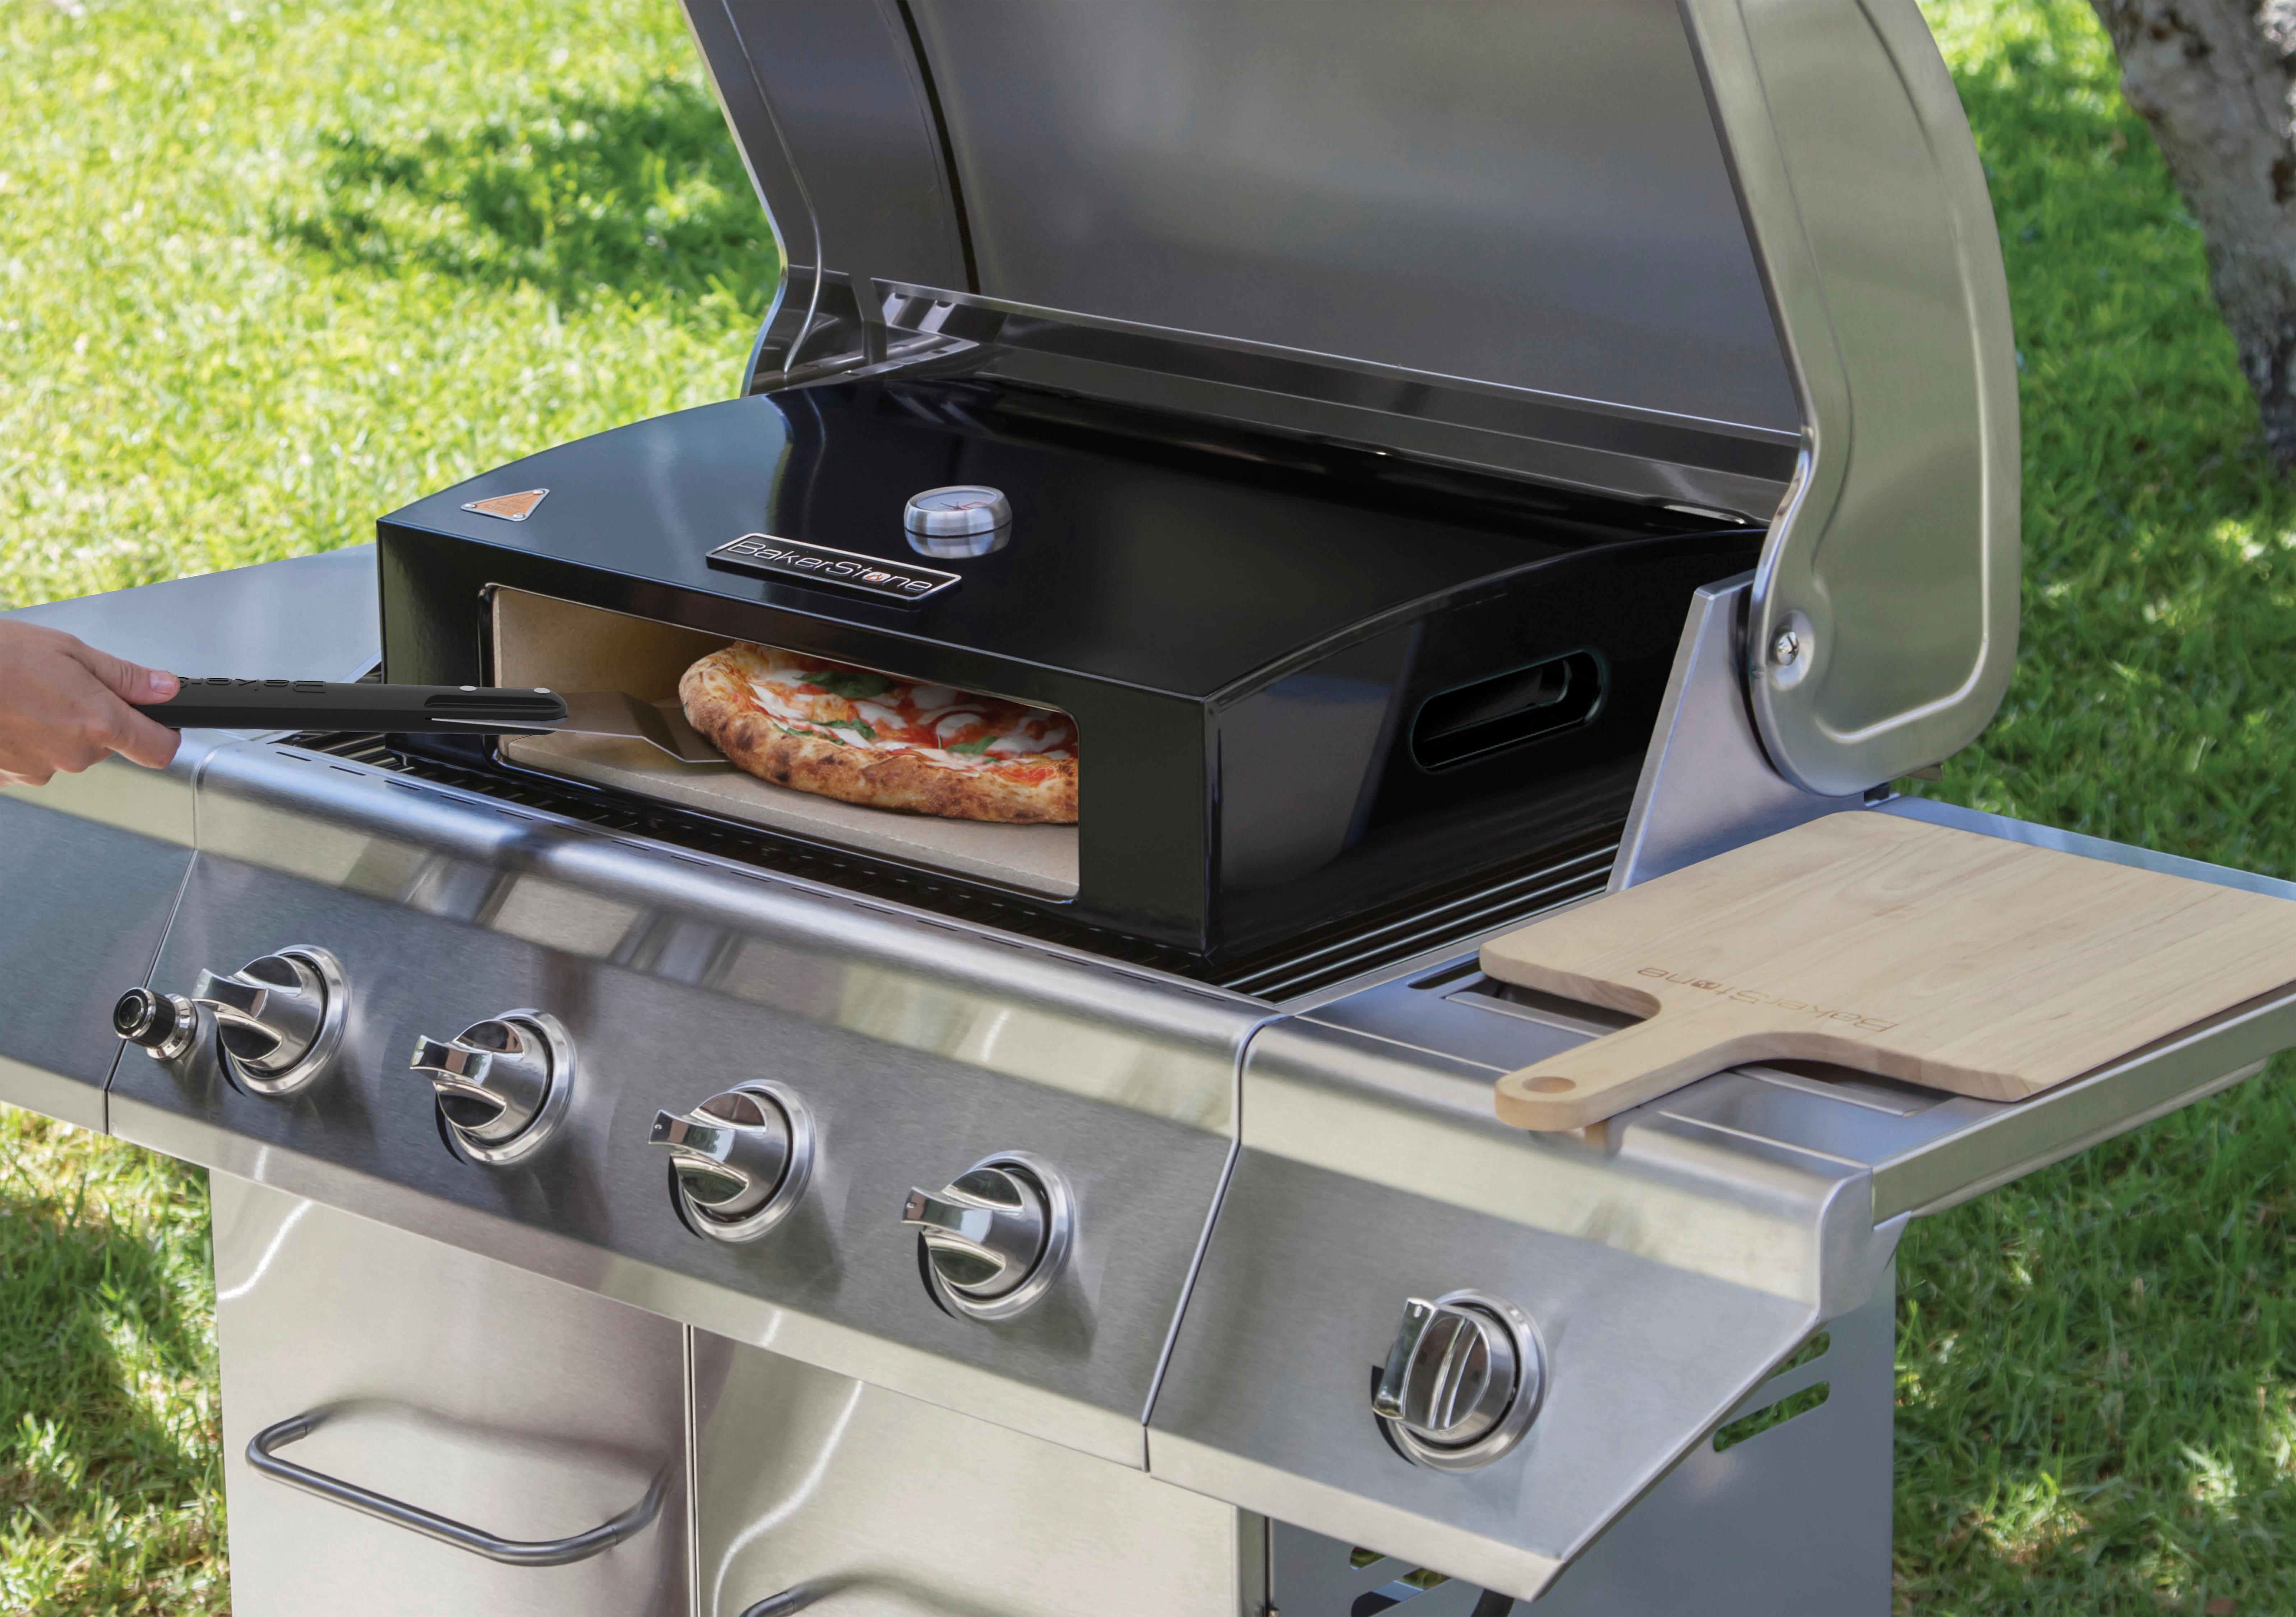 Best Bakerstone Pizza Oven Box Kit, Bakerstone Outdoor Lp Gas Multi Function Cooking Center